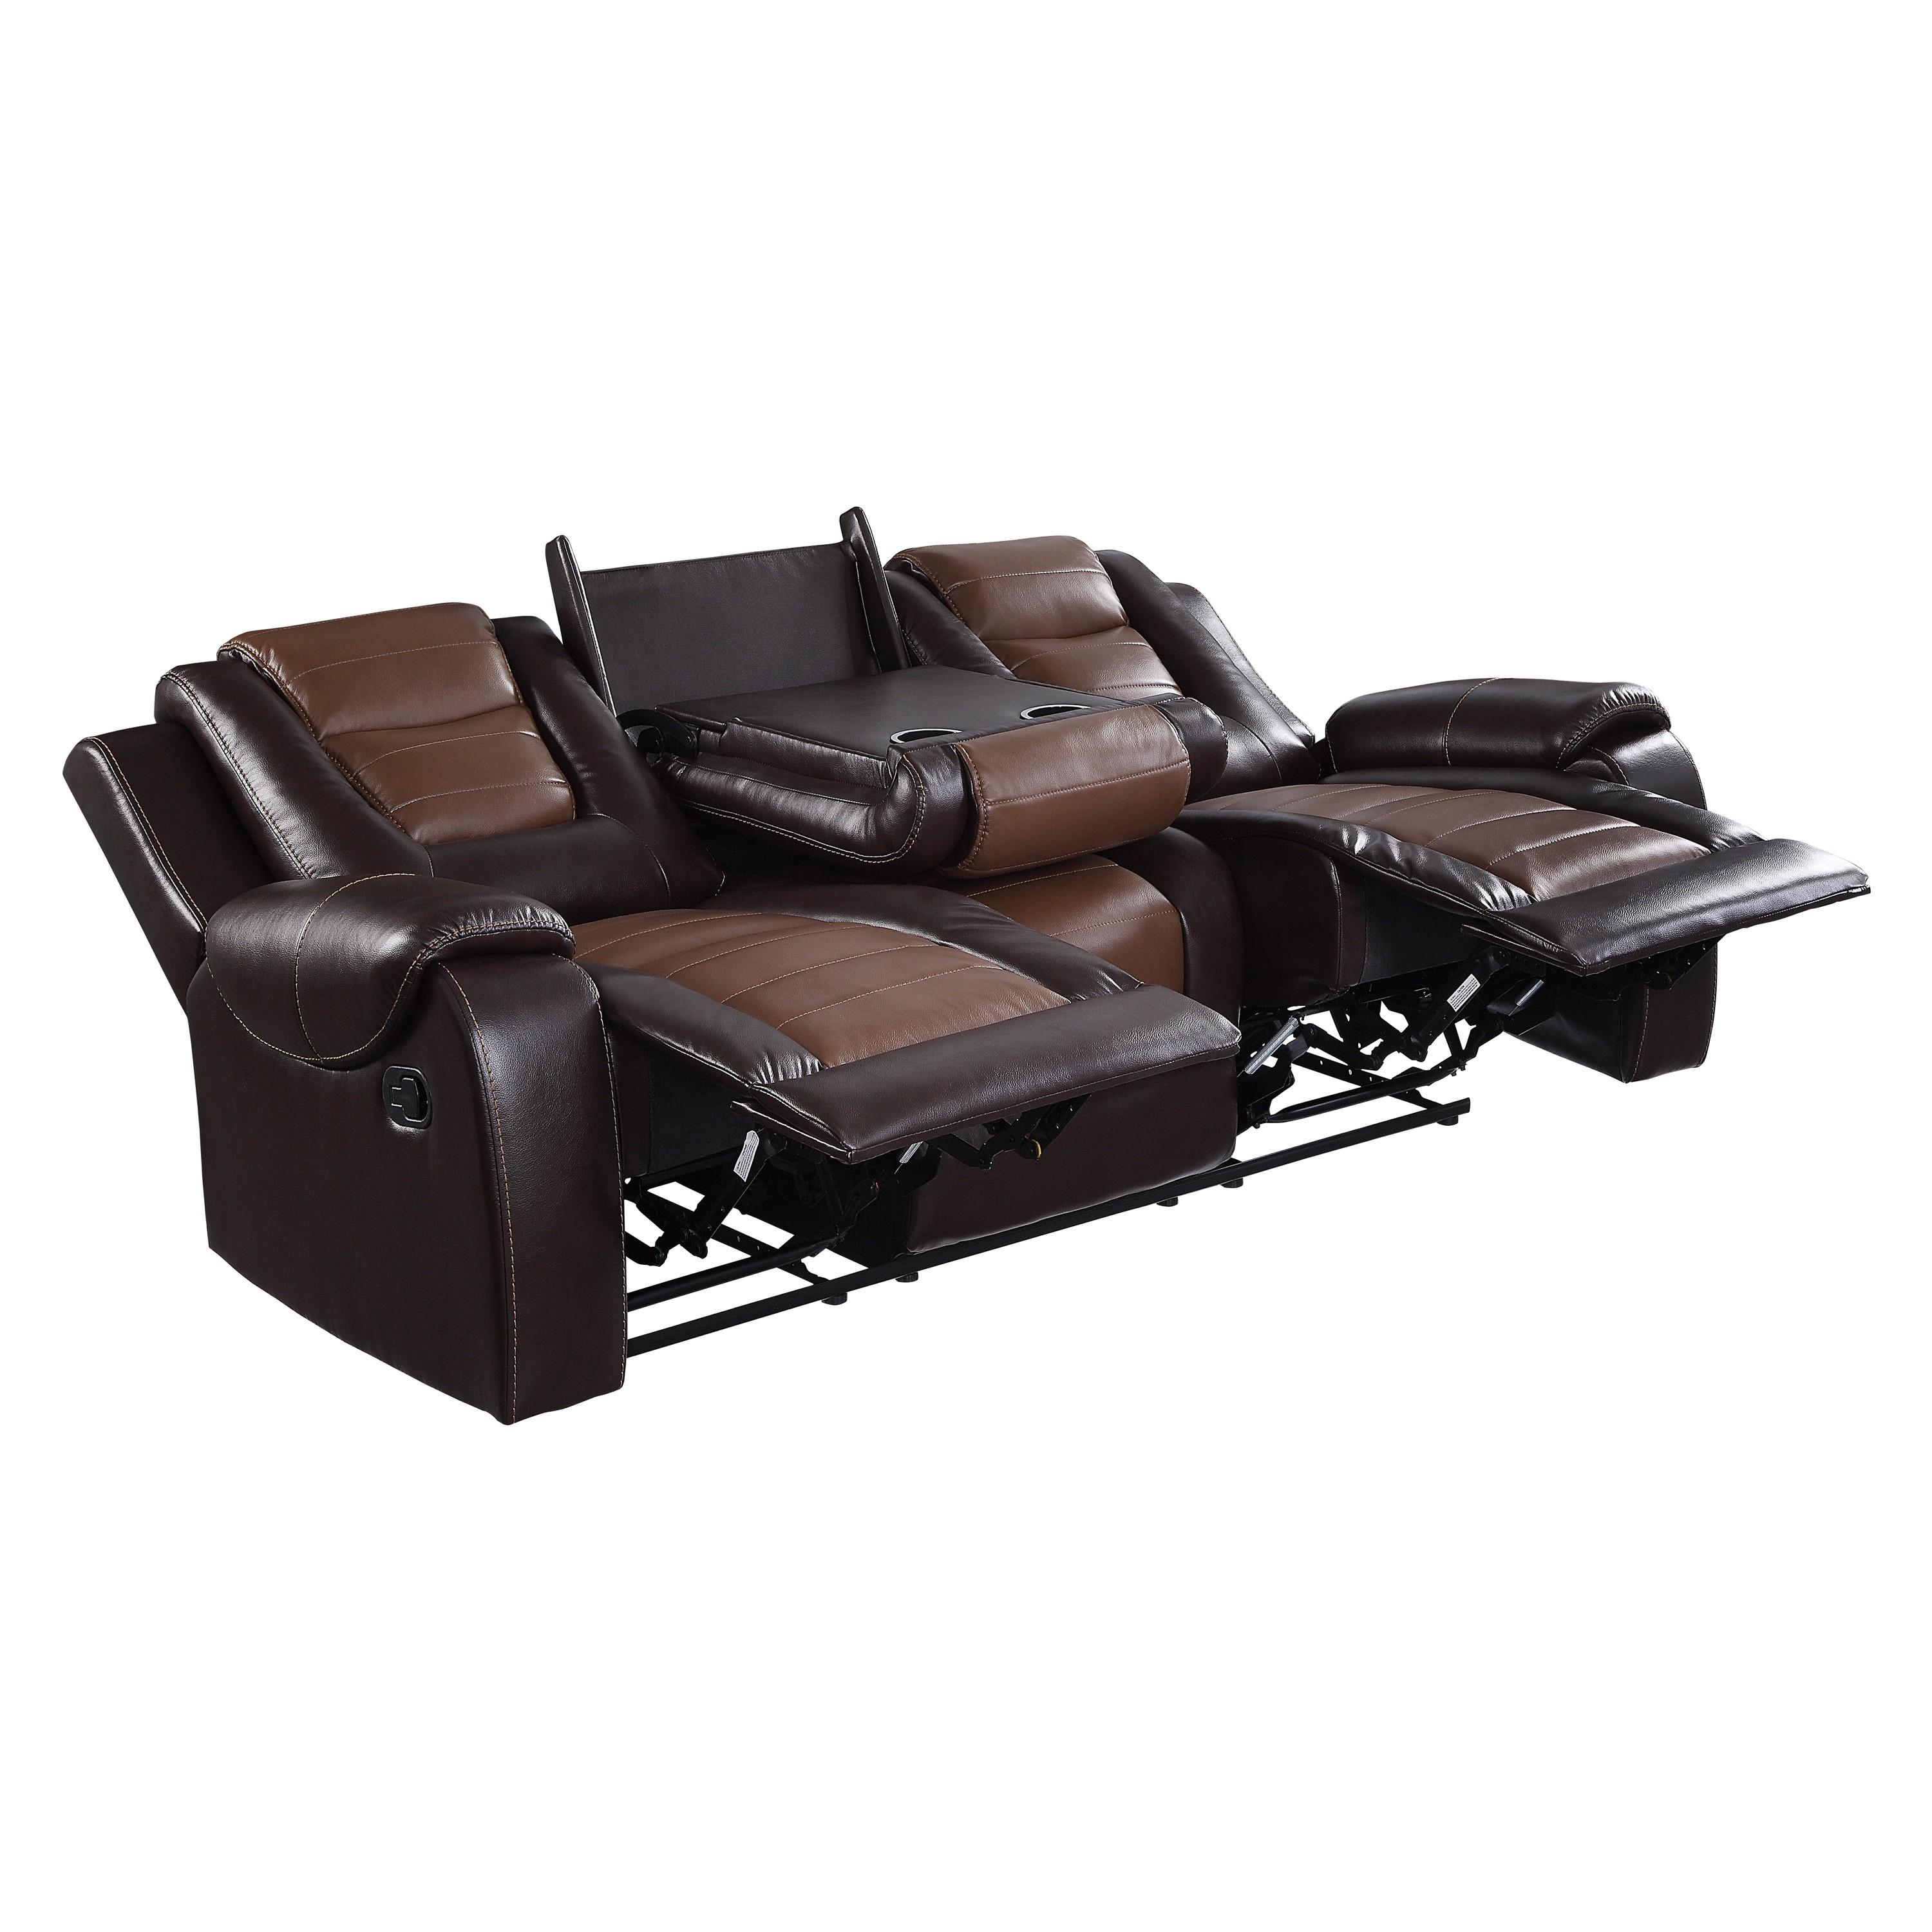 

                    
Homelegance 9470BR-3 Briscoe Reclining Sofa Light Brown/Dark Brown Faux Leather Purchase 
